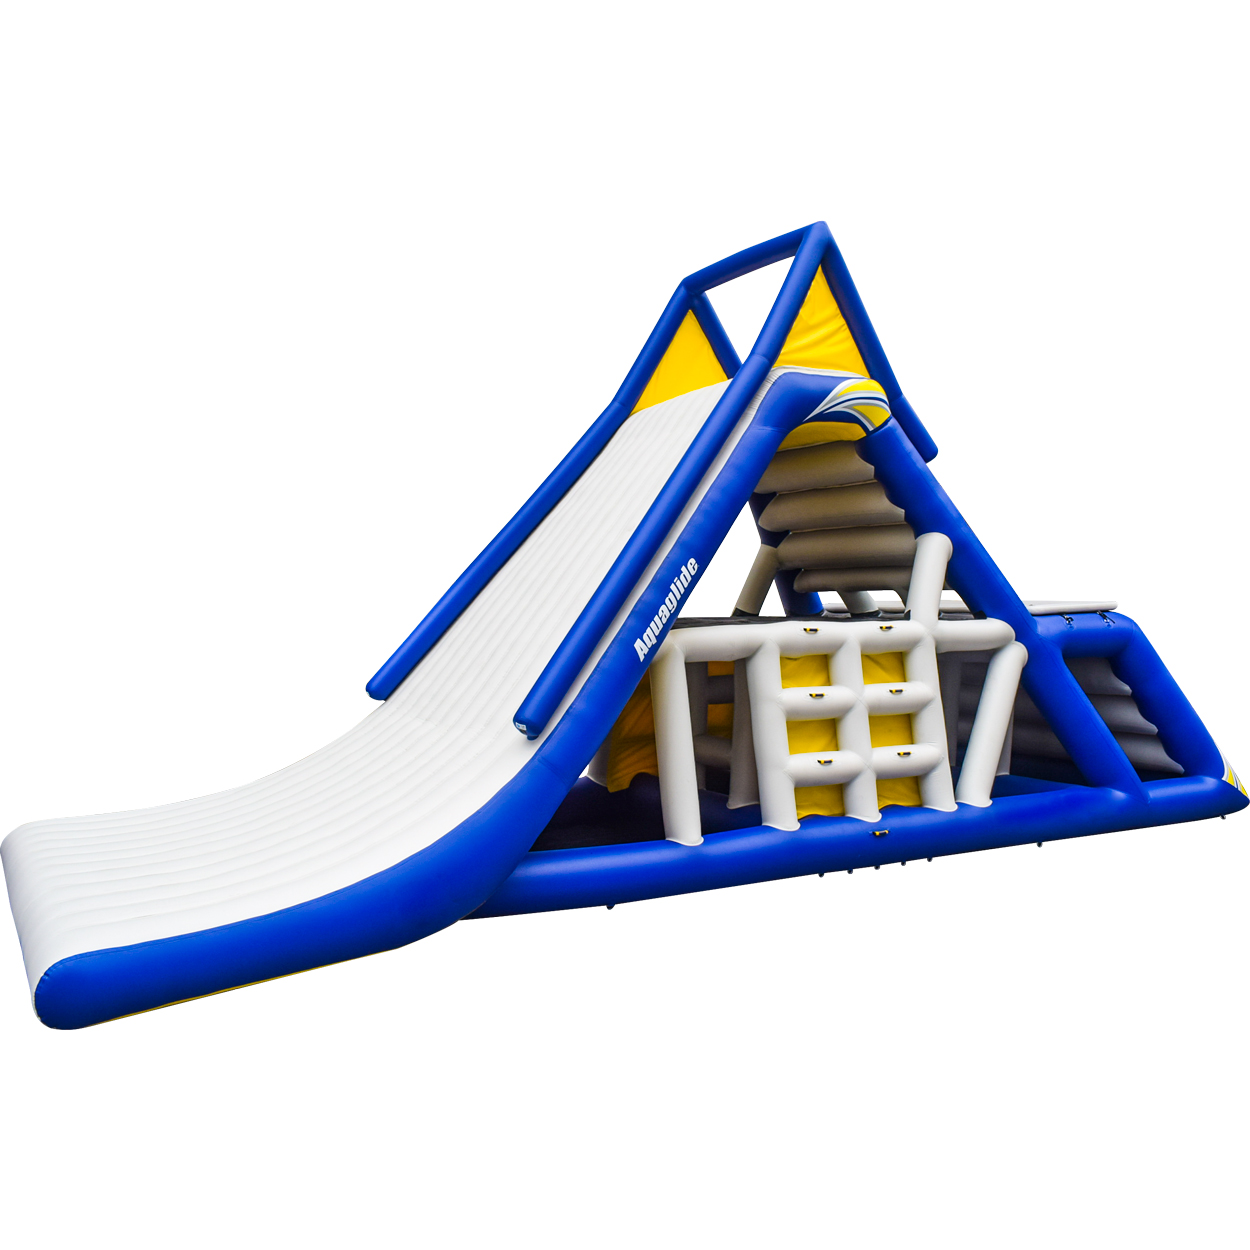 Aquaglide Everest - Huge Water Slide, Climb, Slide, Relax and Bounce